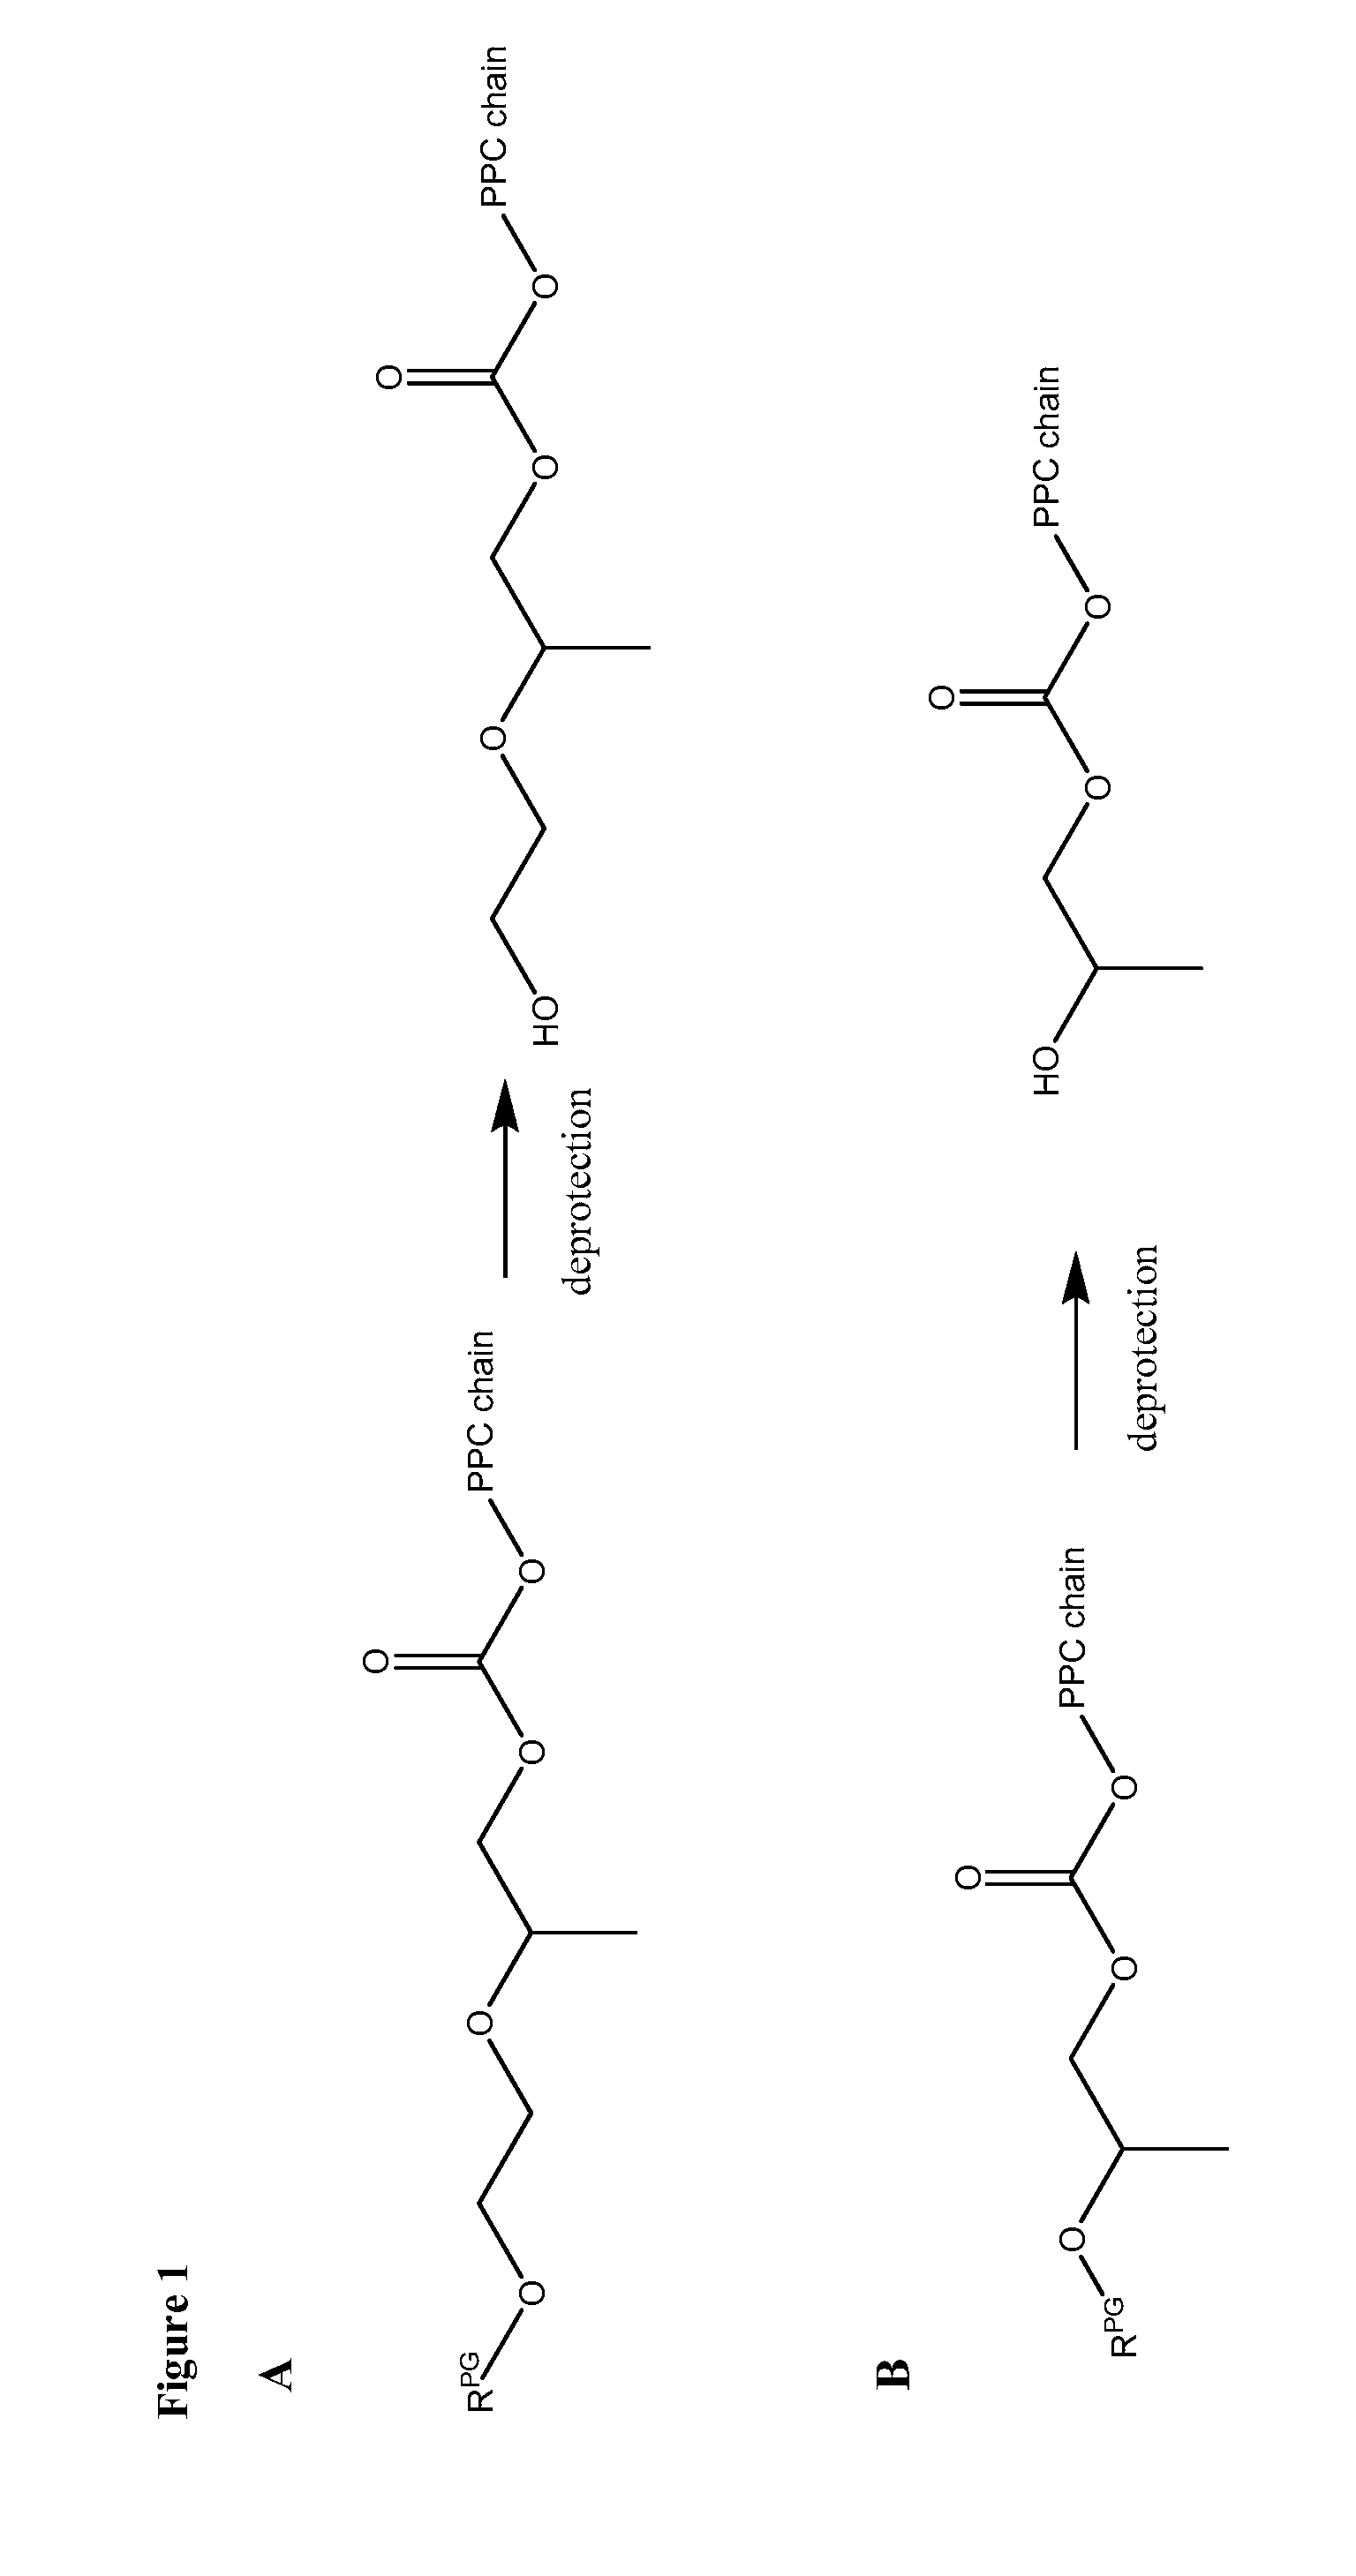 Polycarbonate polyol compositions and methods